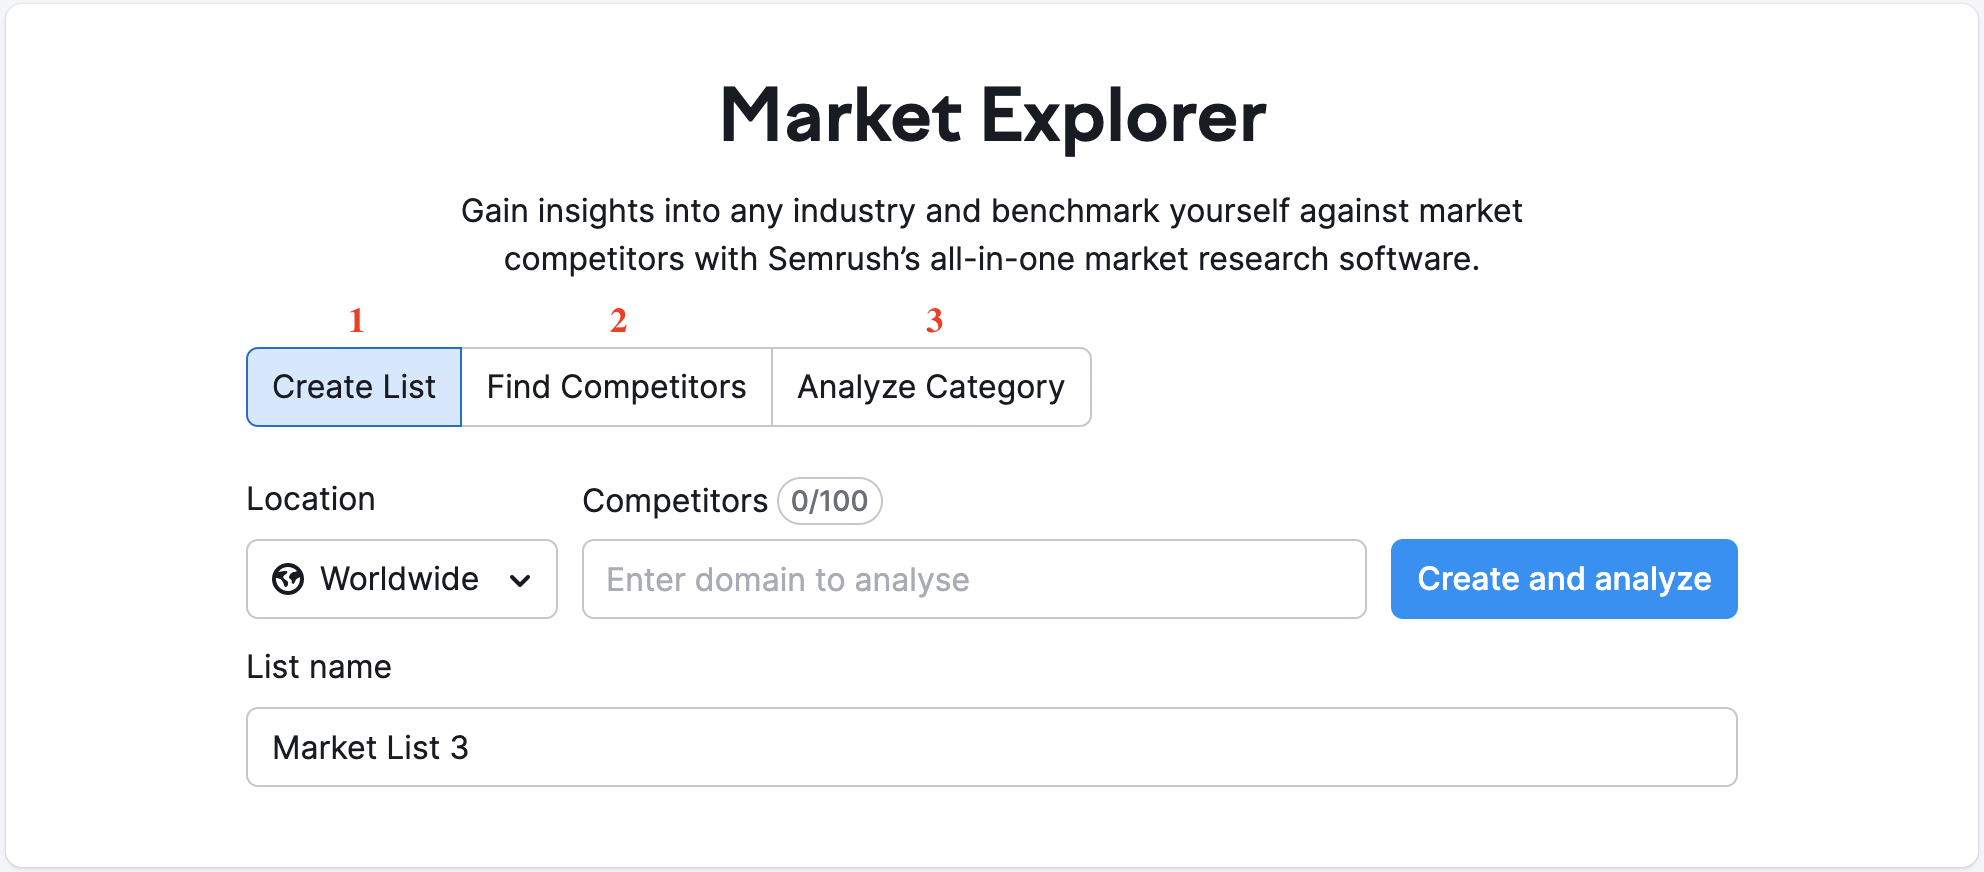 Market Explorer landing page with three options available and marked with red numbers: 1 – Create List, 2 – Find Competitors, 3 – Analyze Category.